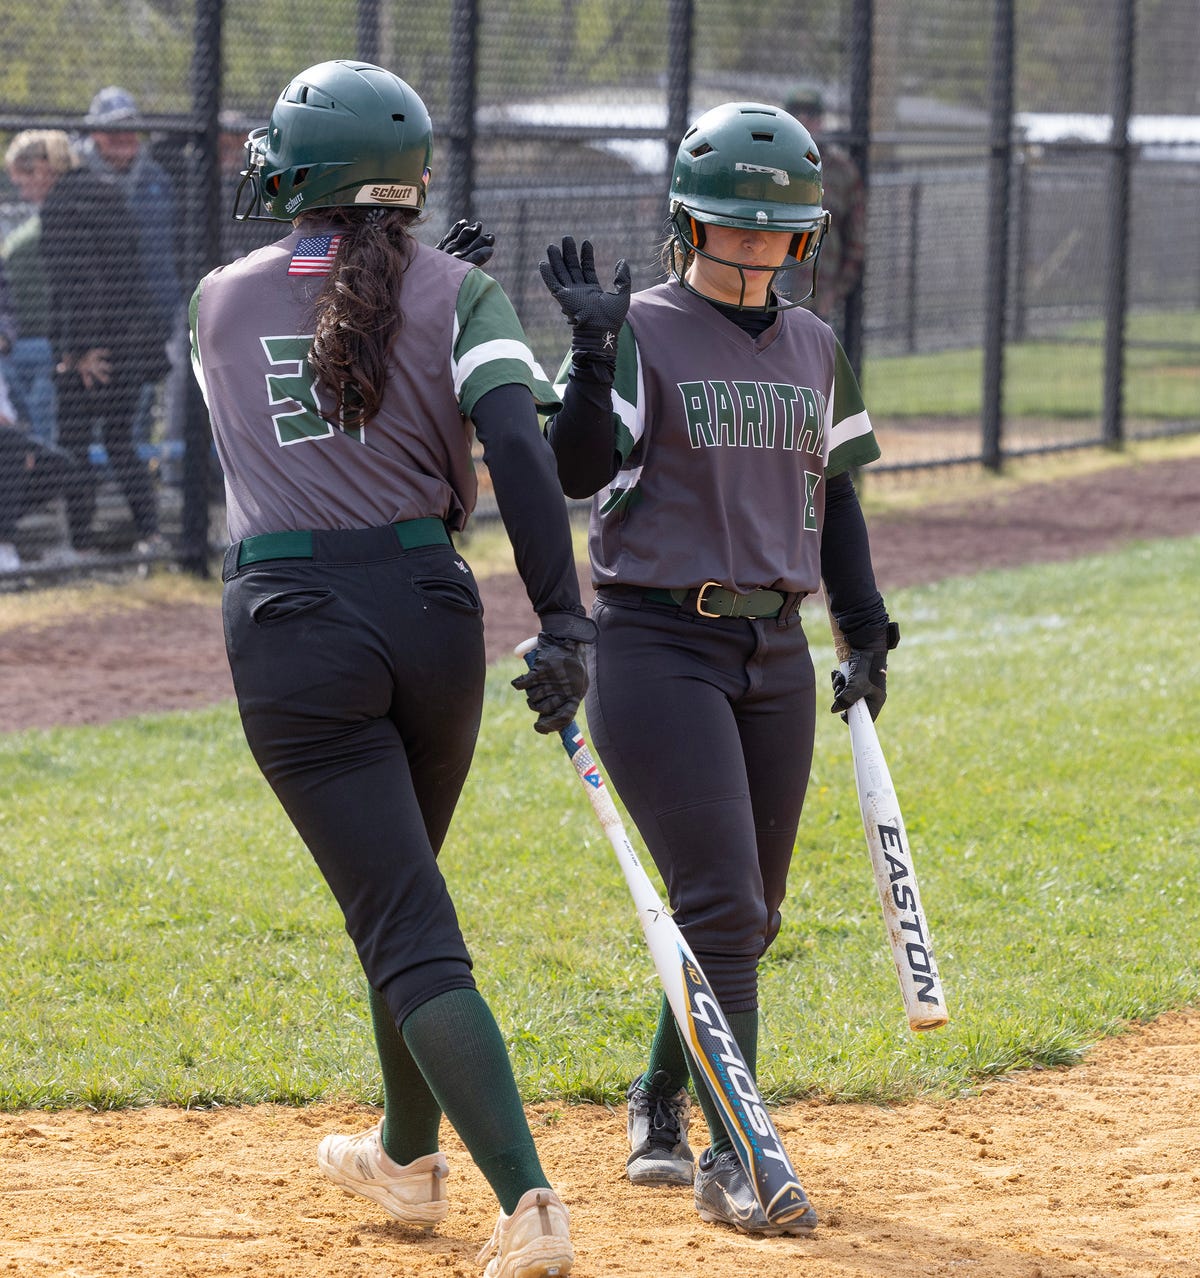 VOTE: Shore Softball Player of the Week No. 3, sponosred by Larson Ford